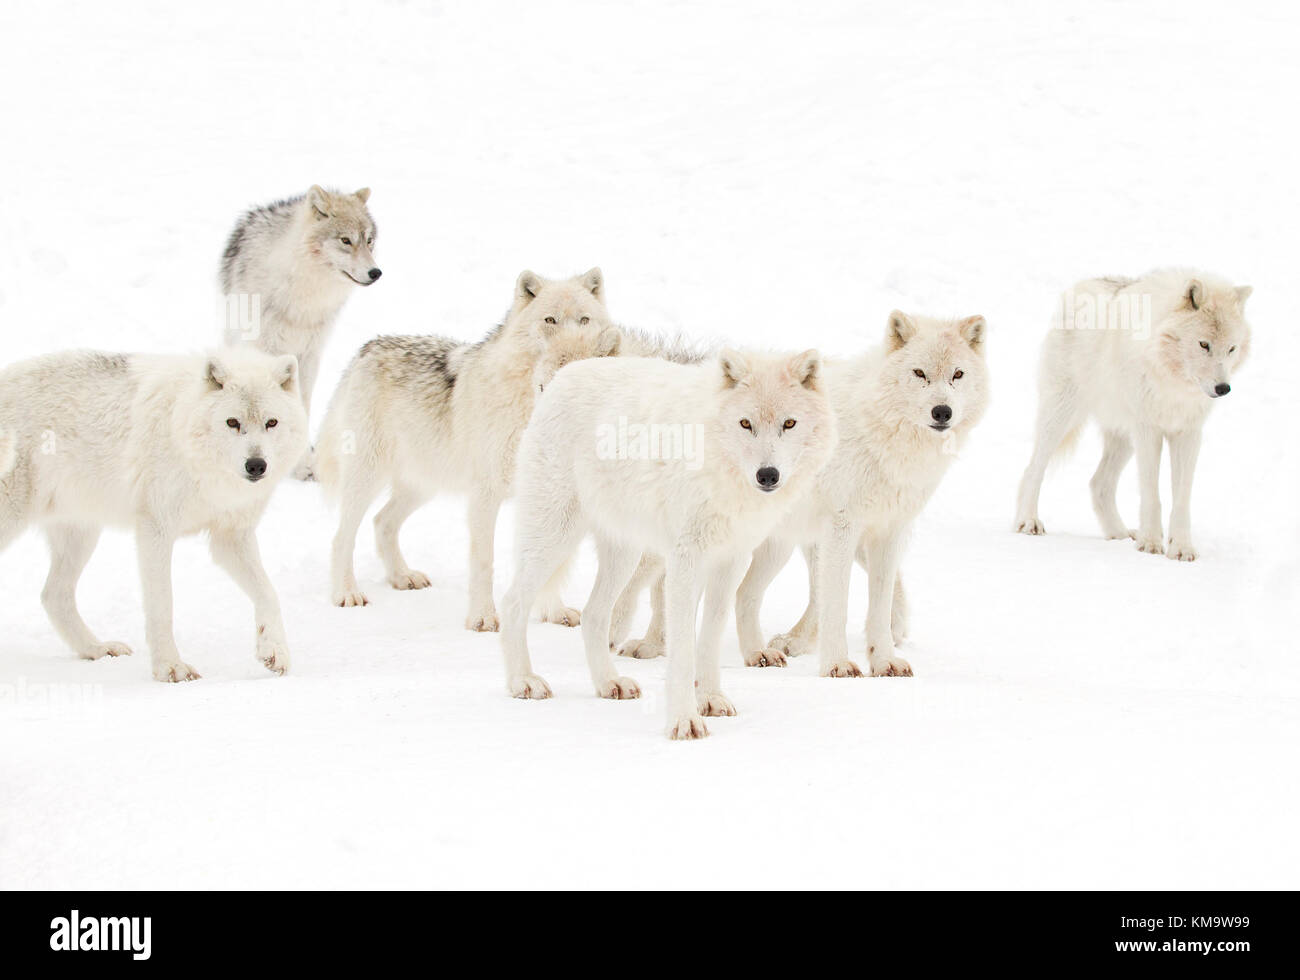 College Pictures Of Arctic Wolves